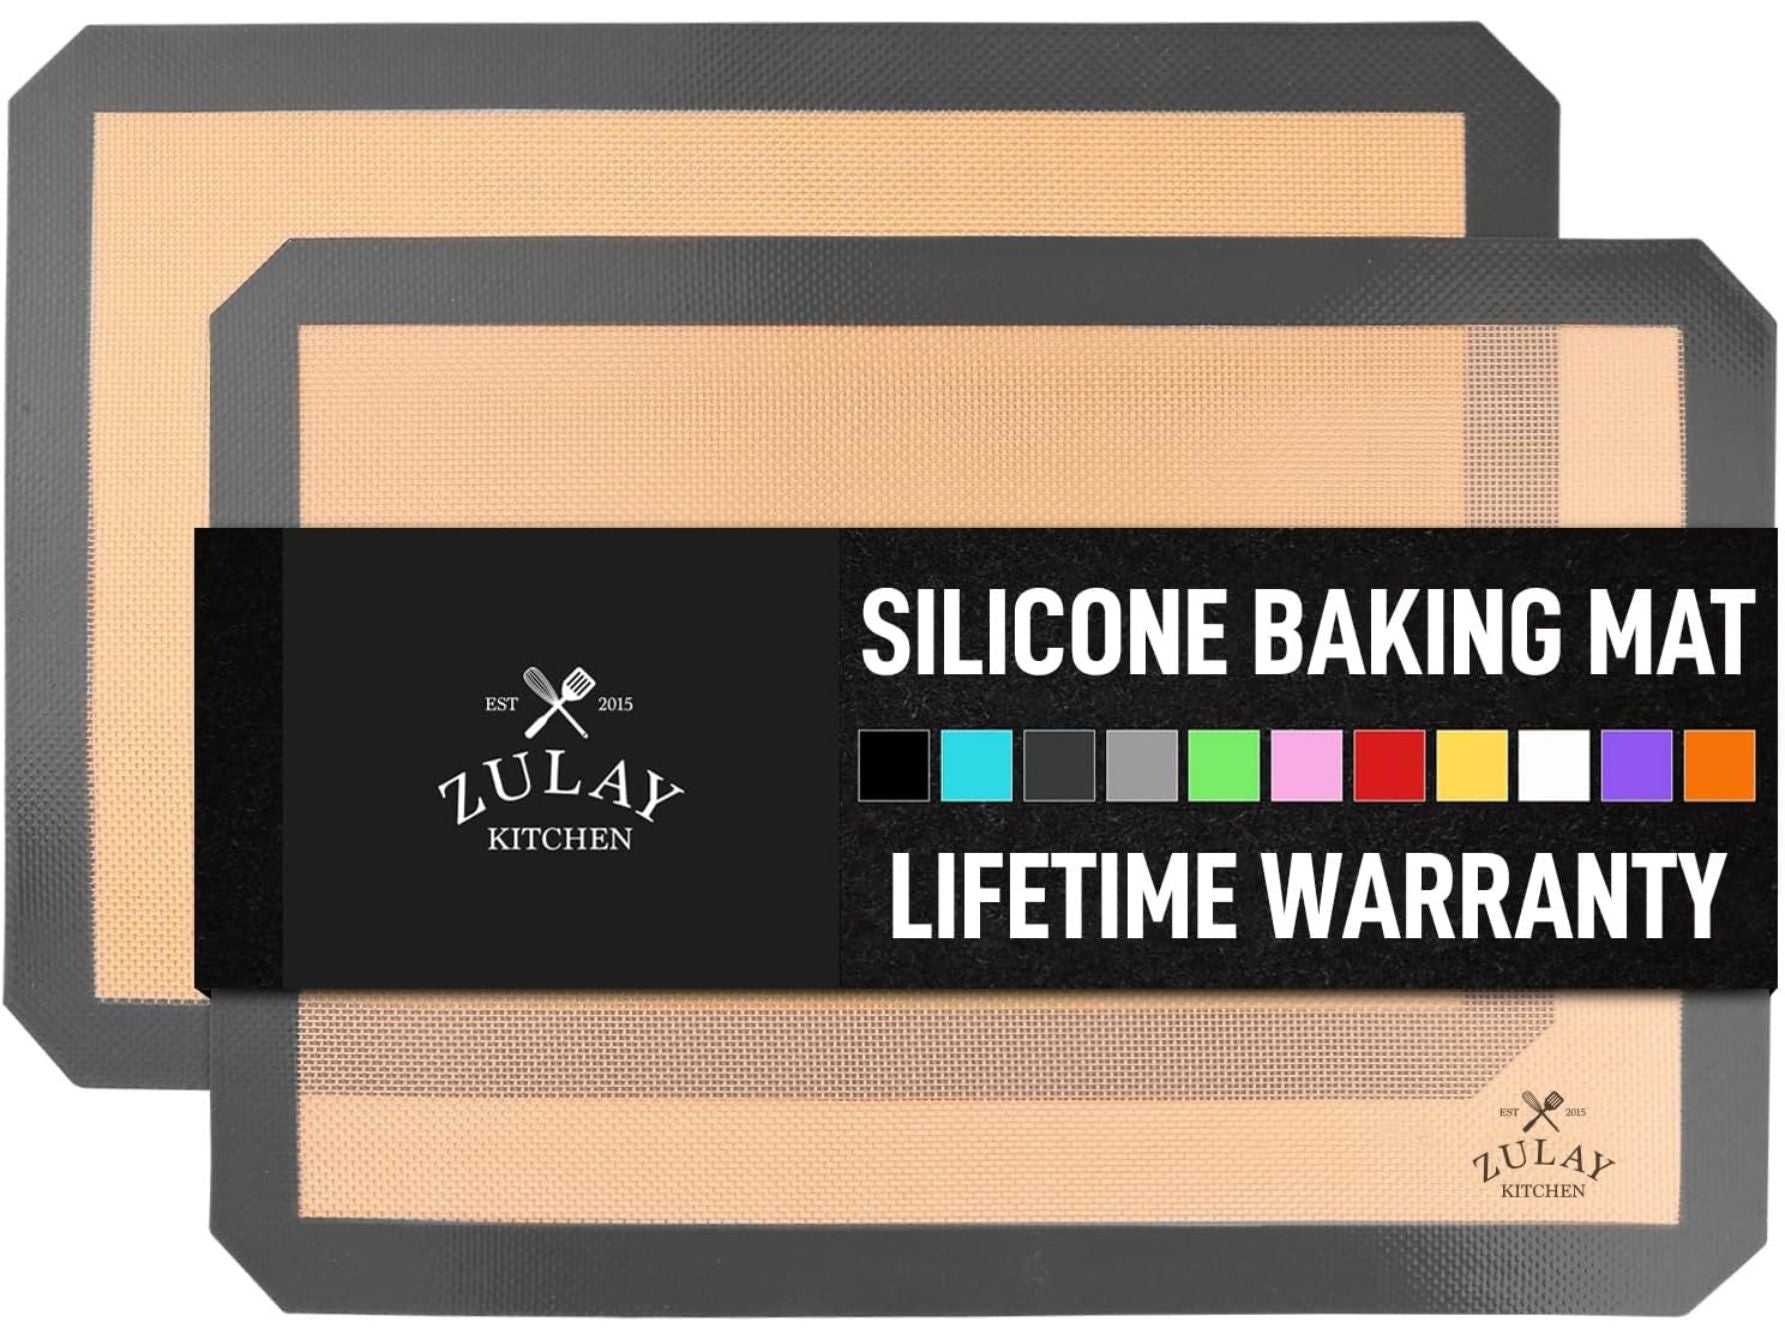 Perforated Baking Pan - 13 x 18 x 1, Half Sheet - ULINE - Qty of 12 - H-10762